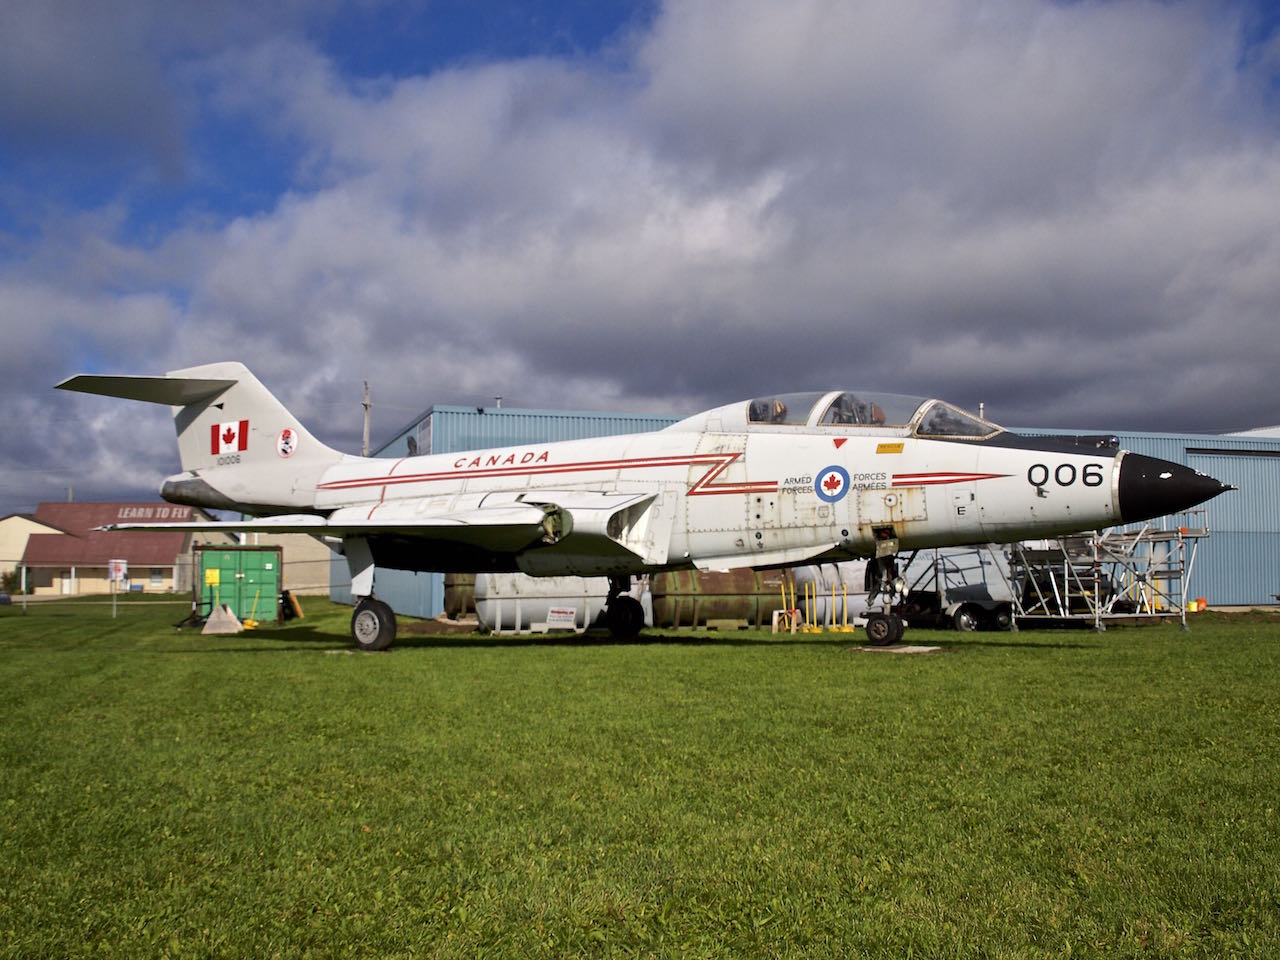 CF-101F 101006 made the world's last Voodoo flight on 09 April 1987, as it made a delivery flight from CFB North Bay to CFB Greenwood via CFB Bagotville and CFB Chatham for eventual display at CFB Cornwallis, Nova Scotia.In October 2013, because of corrosion and security concerns, the museum donated 006 to the Jet Aircraft Museum in London, Ontario, where it is presently undergoing refurbishment.